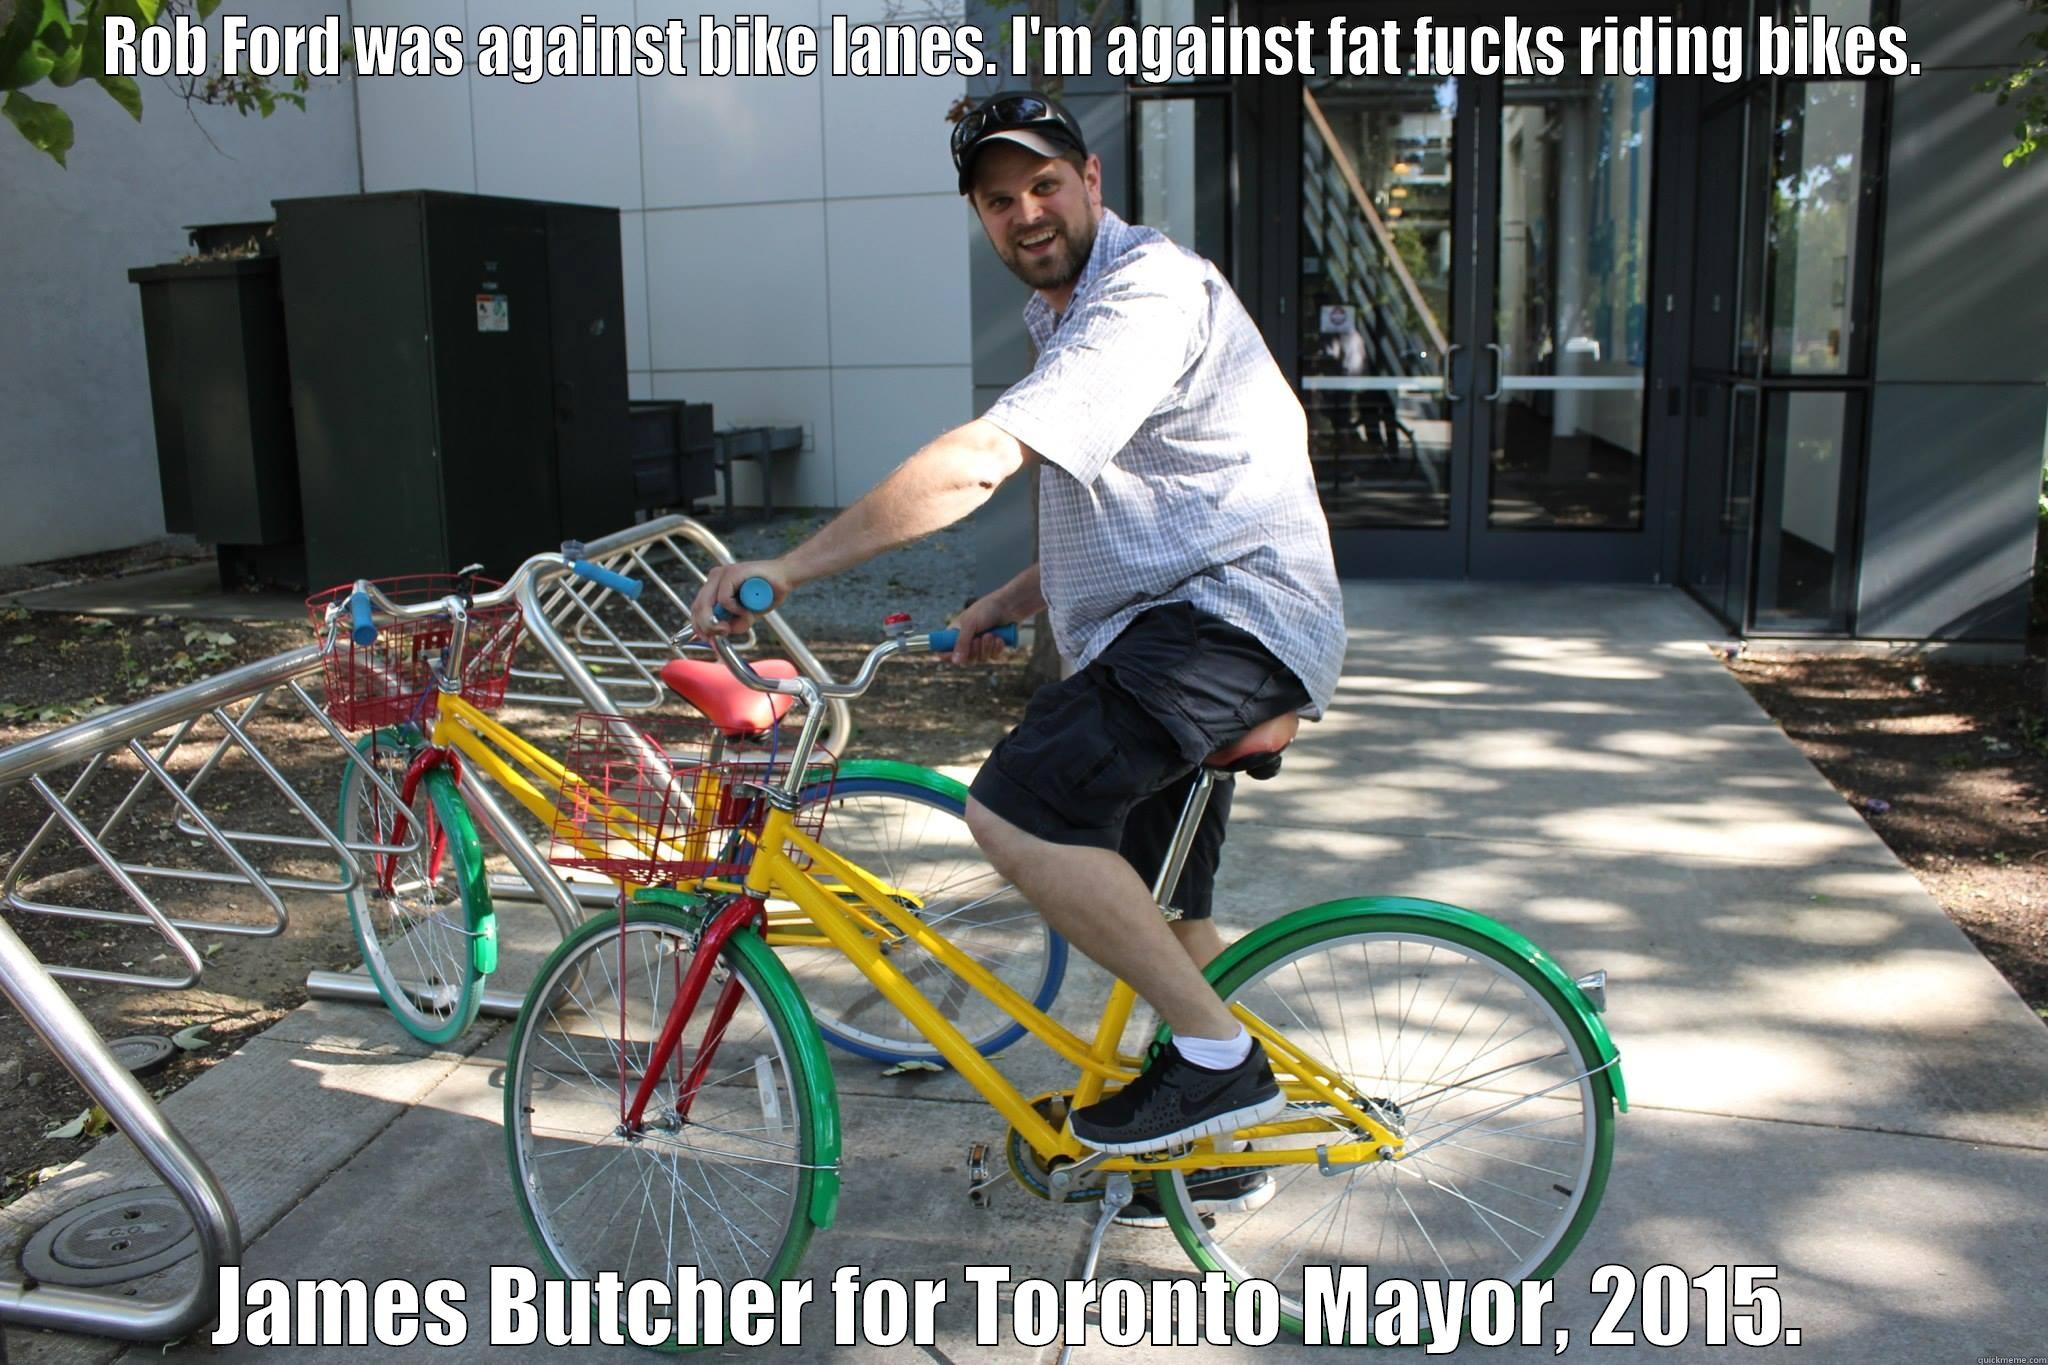 ROB FORD WAS AGAINST BIKE LANES. I'M AGAINST FAT FUCKS RIDING BIKES.  JAMES BUTCHER FOR TORONTO MAYOR, 2015.  Misc